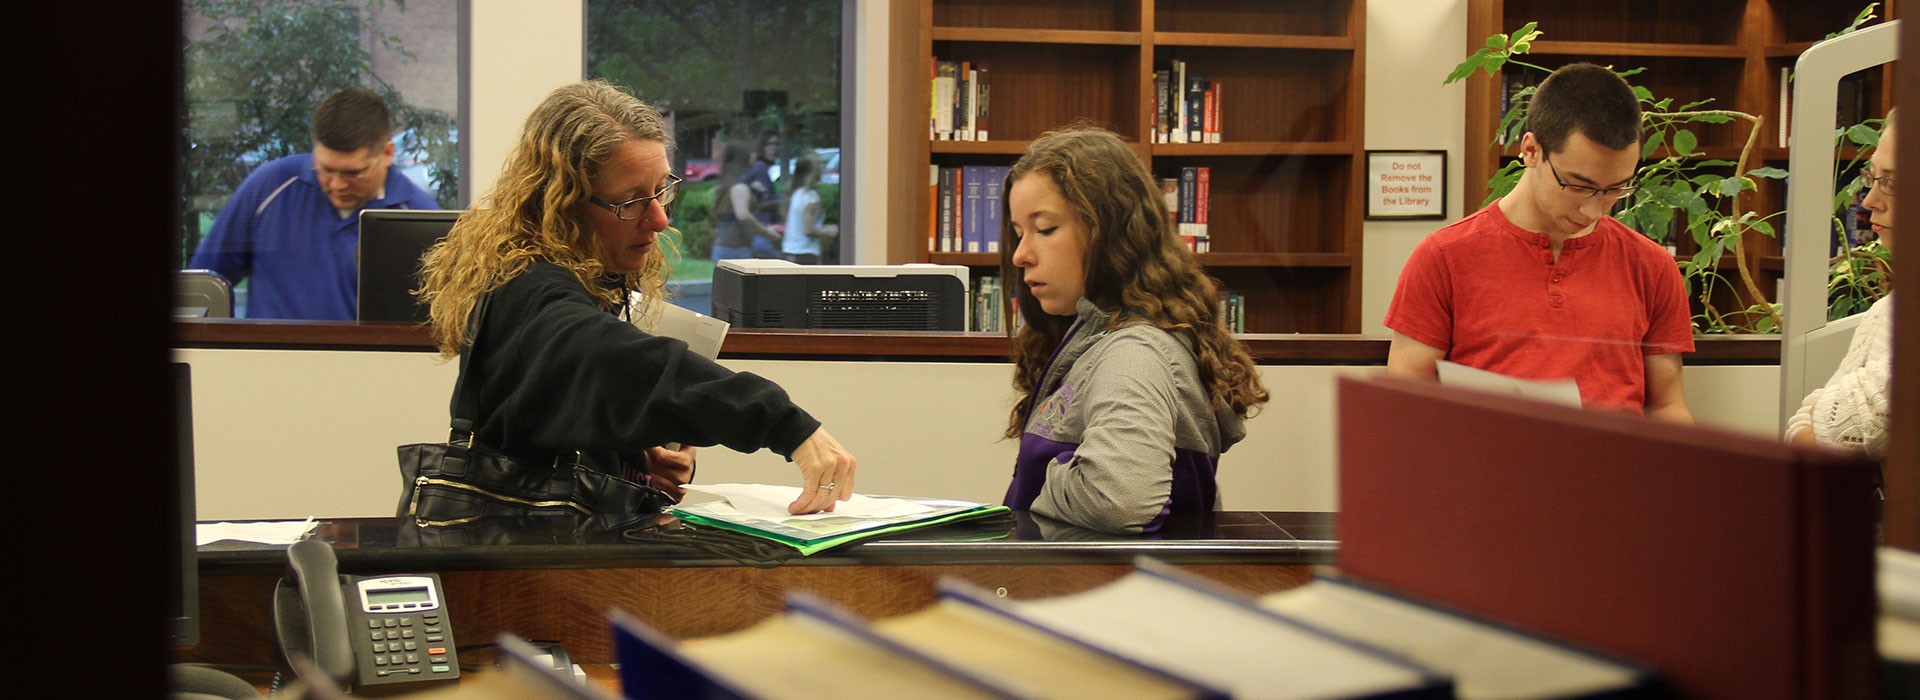 A student receives Admissions advice at the SUNY Morrisville Norwich Campus